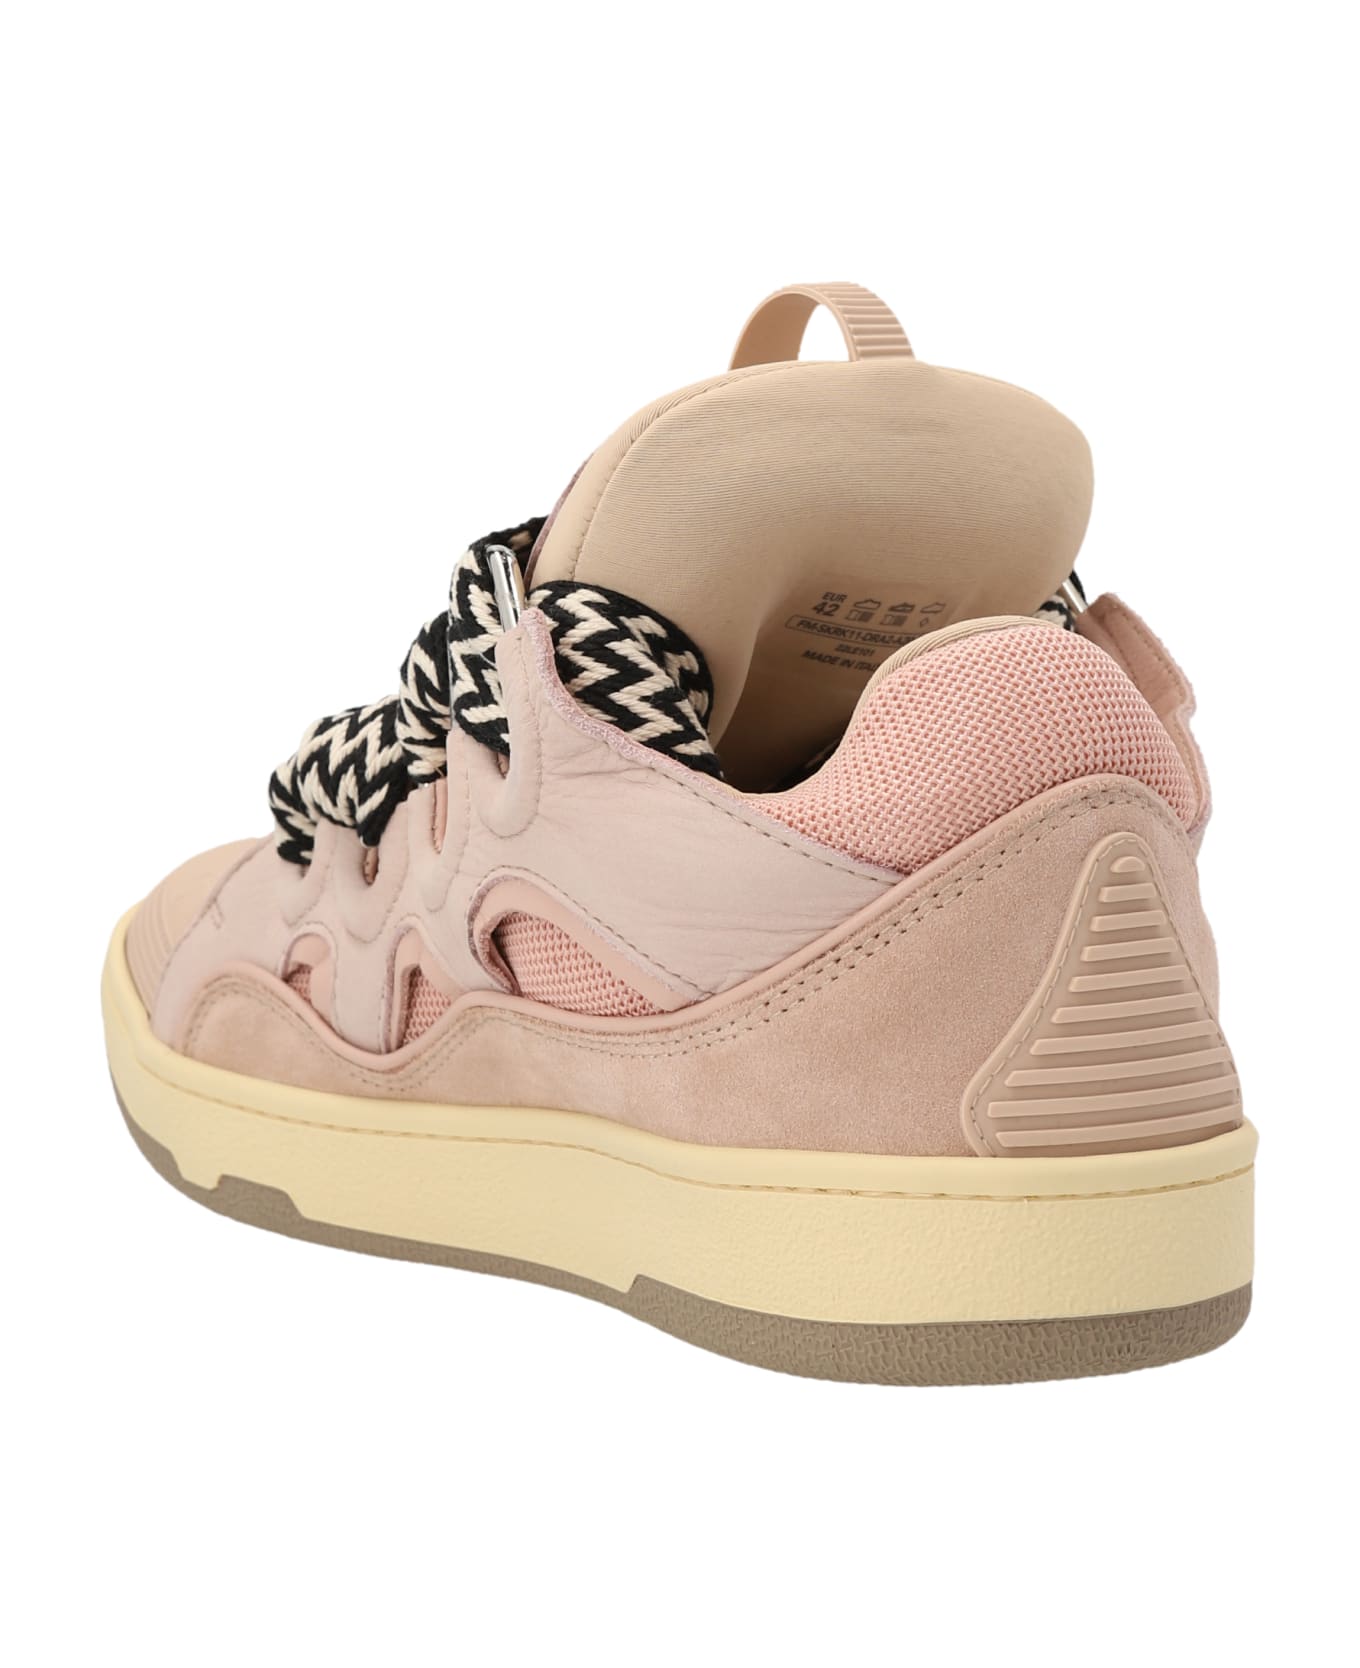 Lanvin 'curb' Sneakers - PINK スニーカー